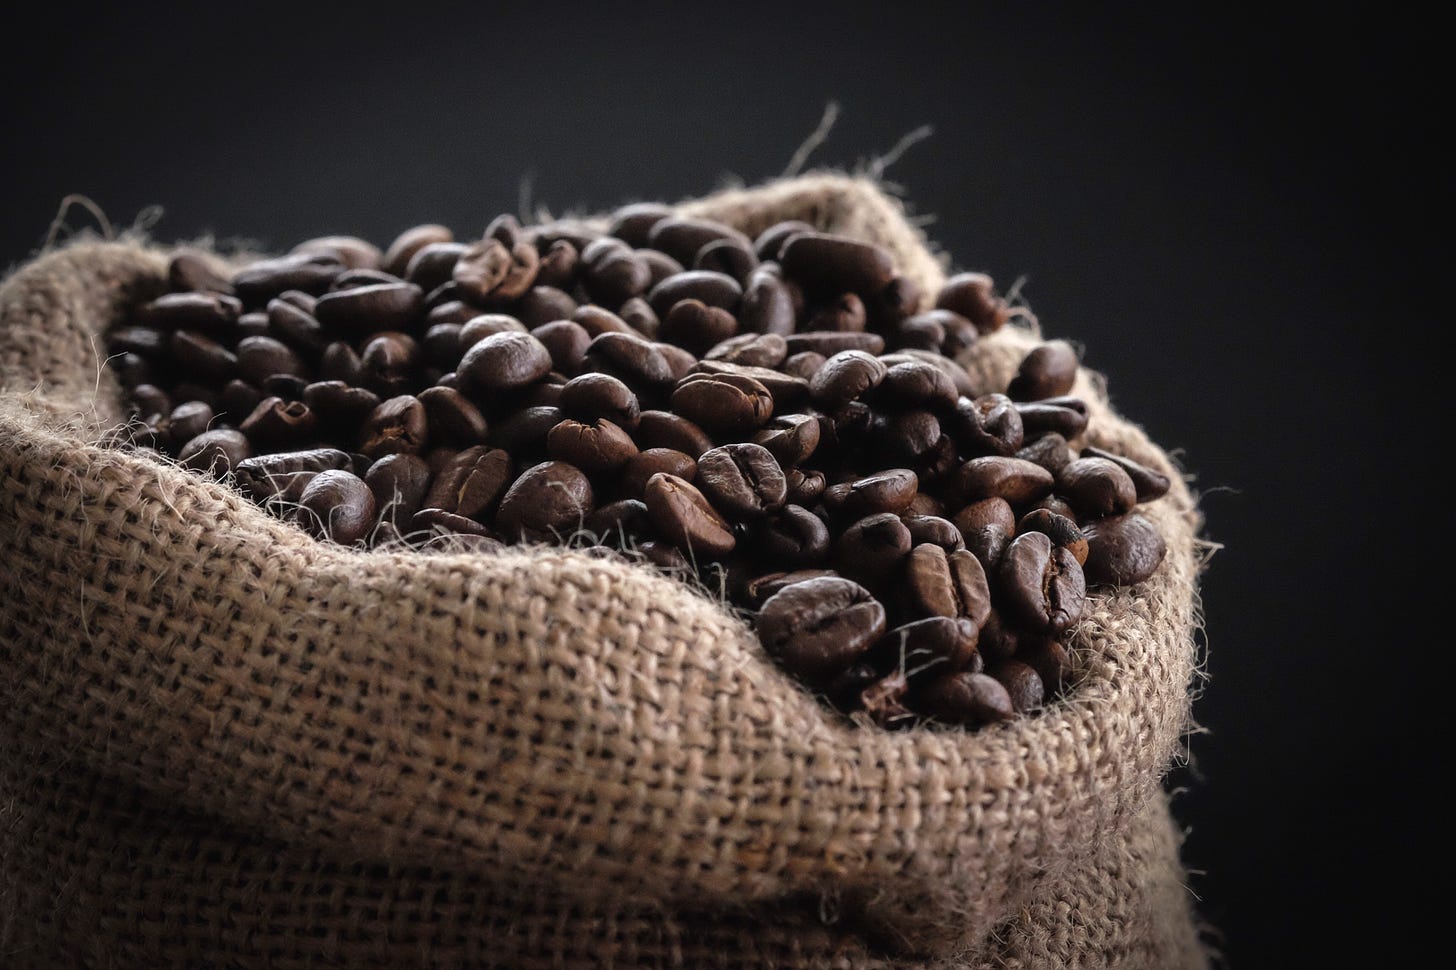 Image of roasted coffee beans in a small burlap sack.